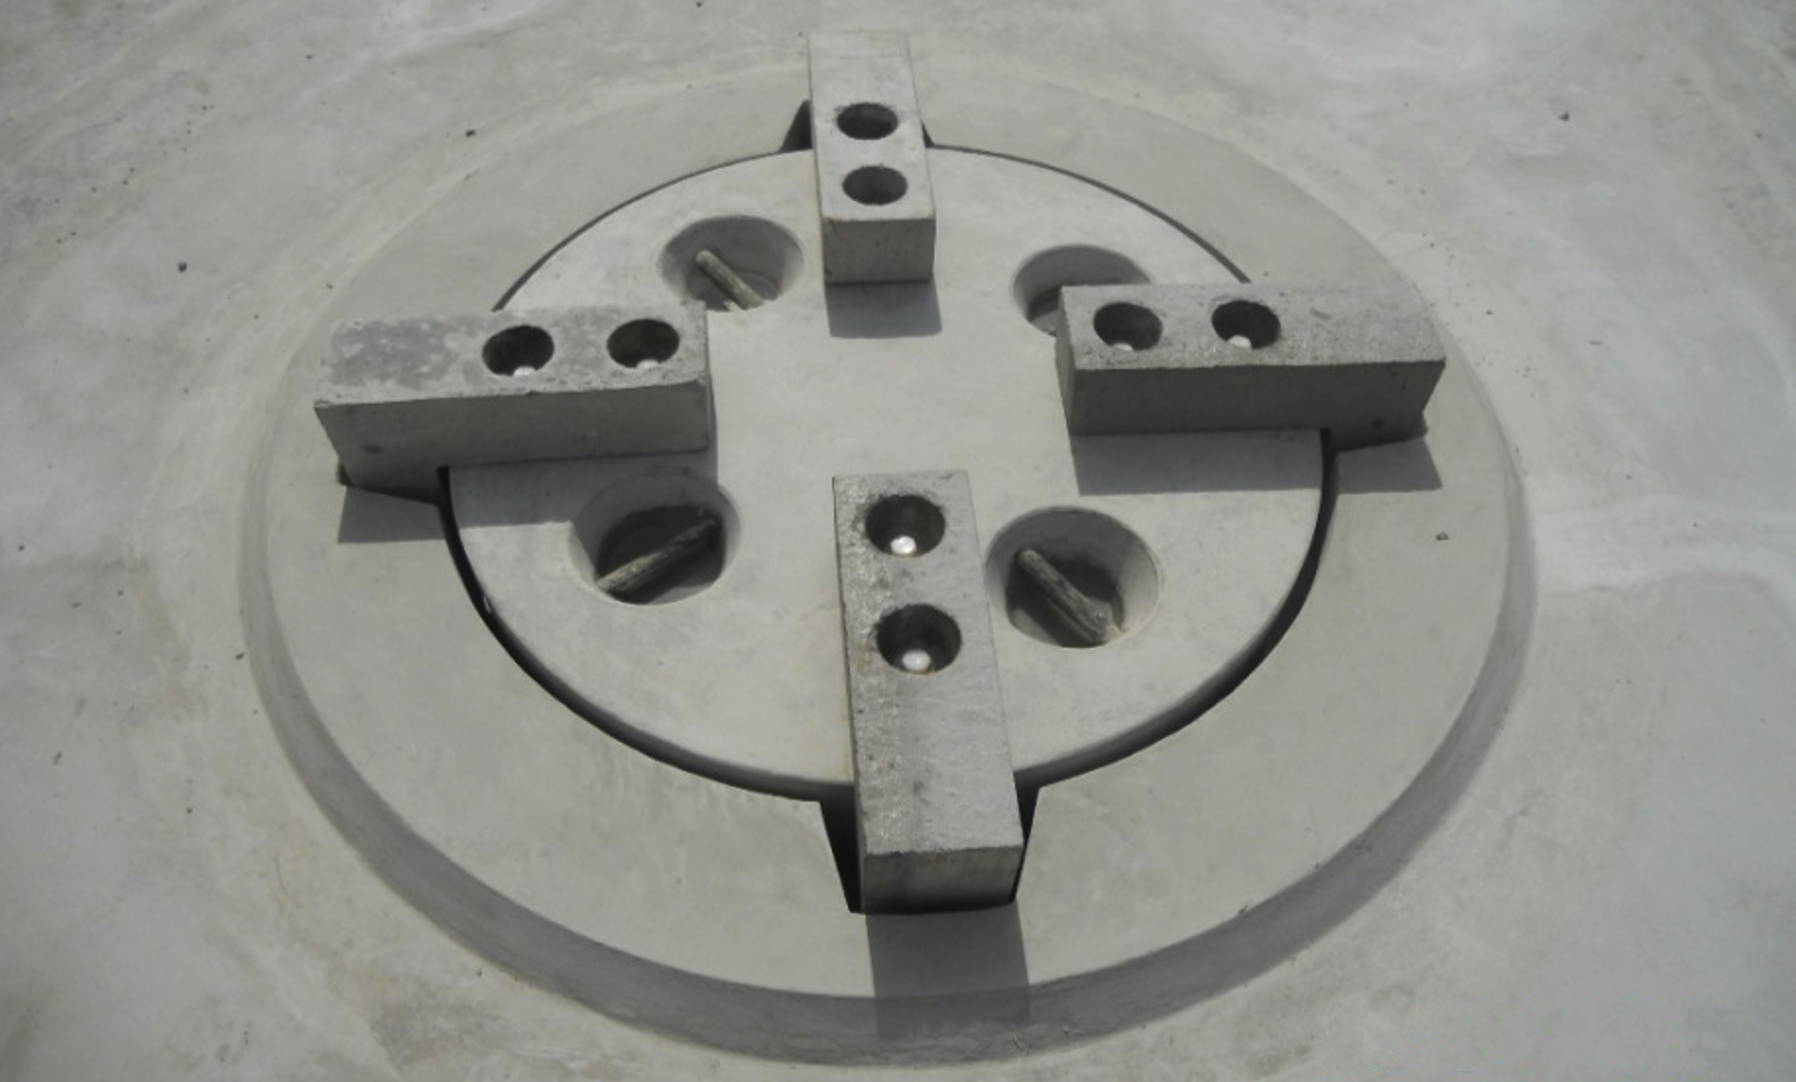 Inside accessible by corrosion-free manhole